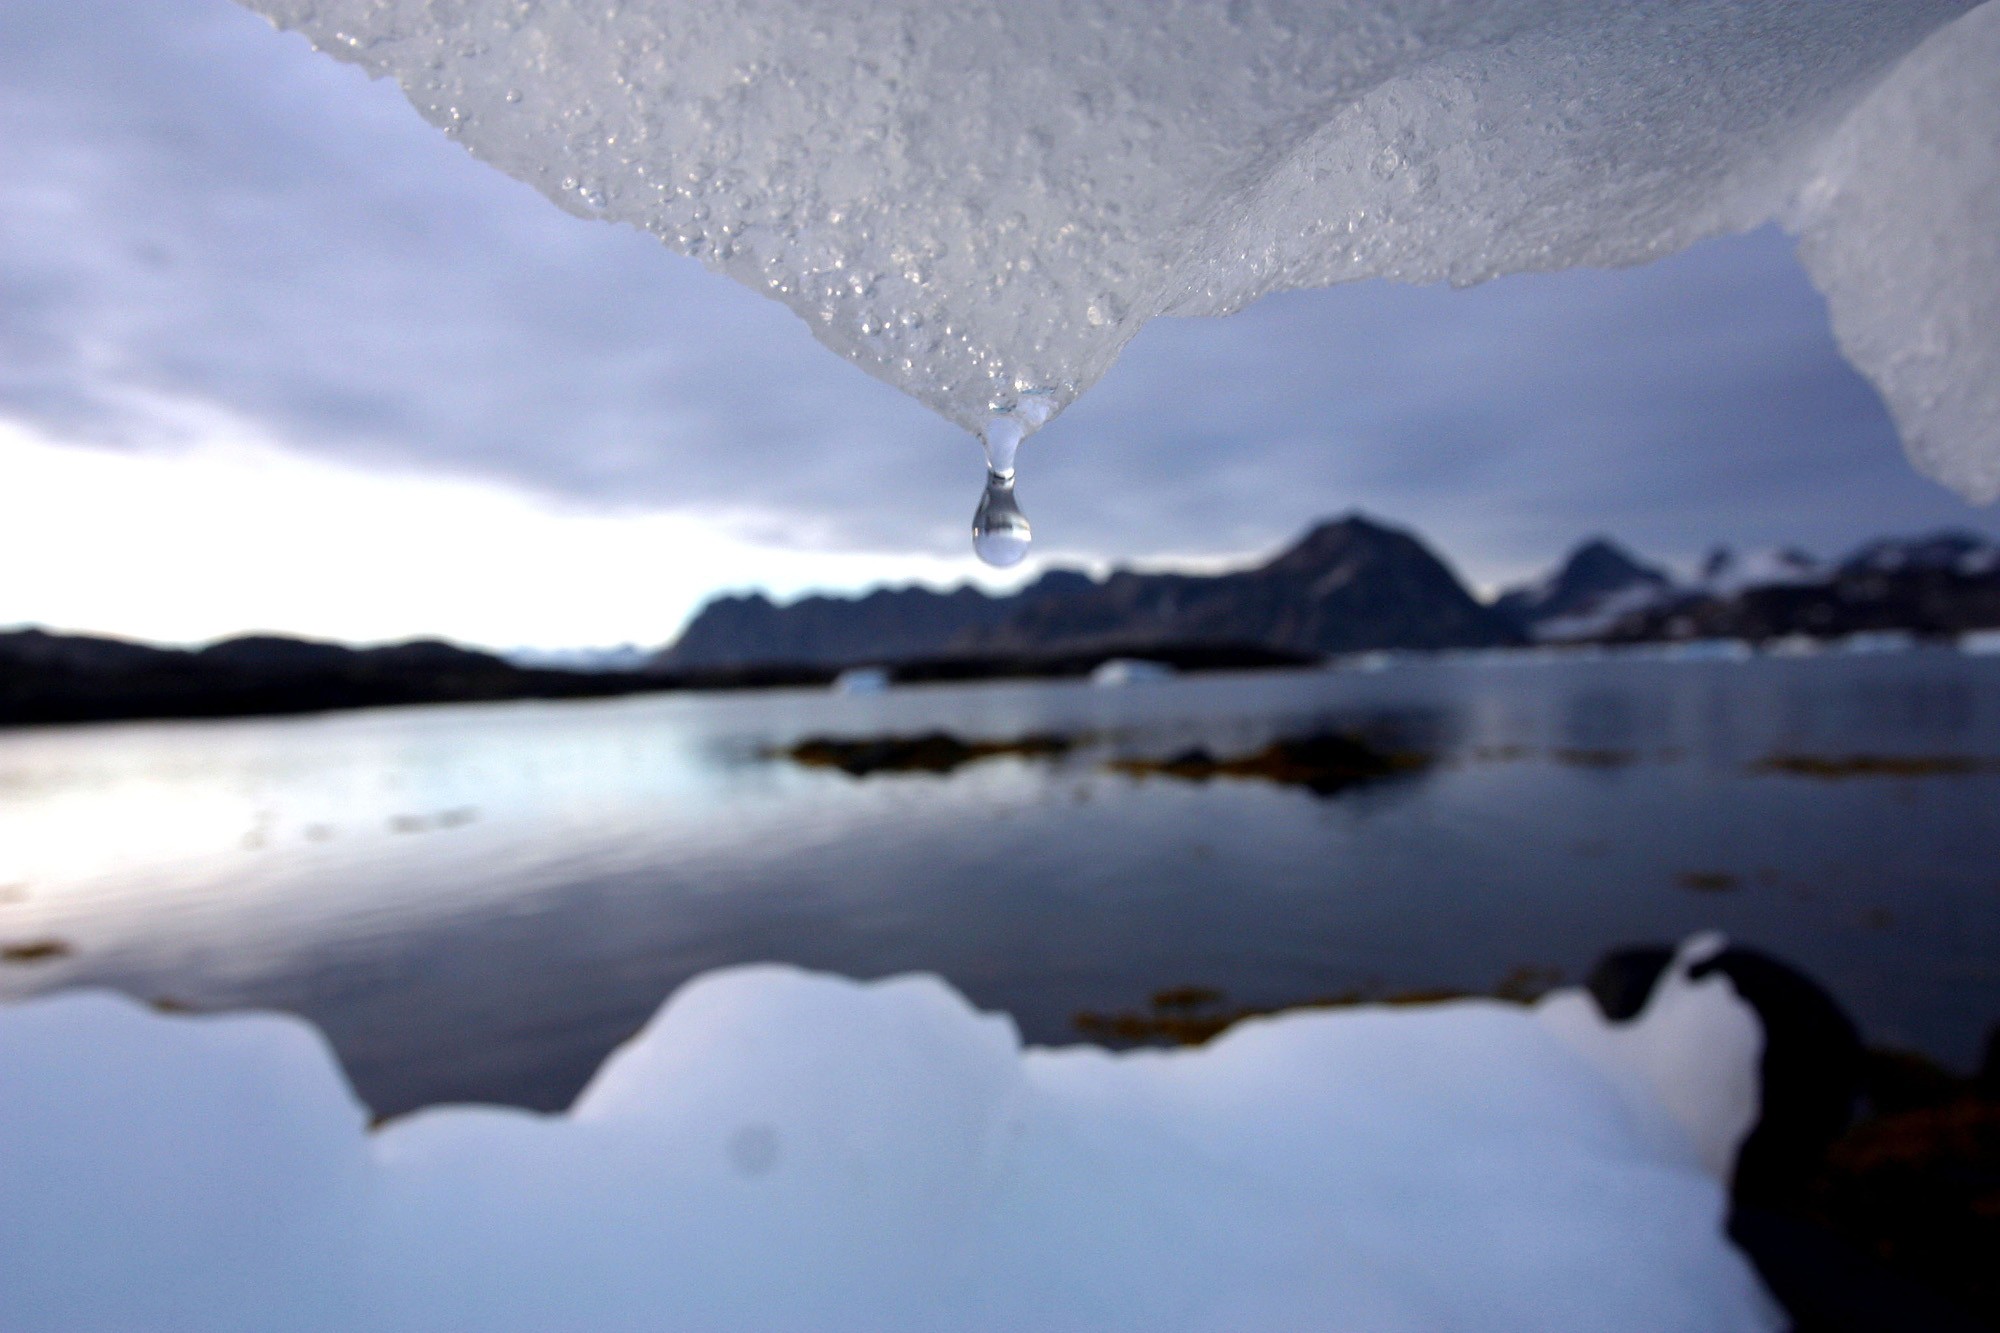 Bottled water said to be sourced from icebergs go for high prices. Photo: AP/ John McConnico